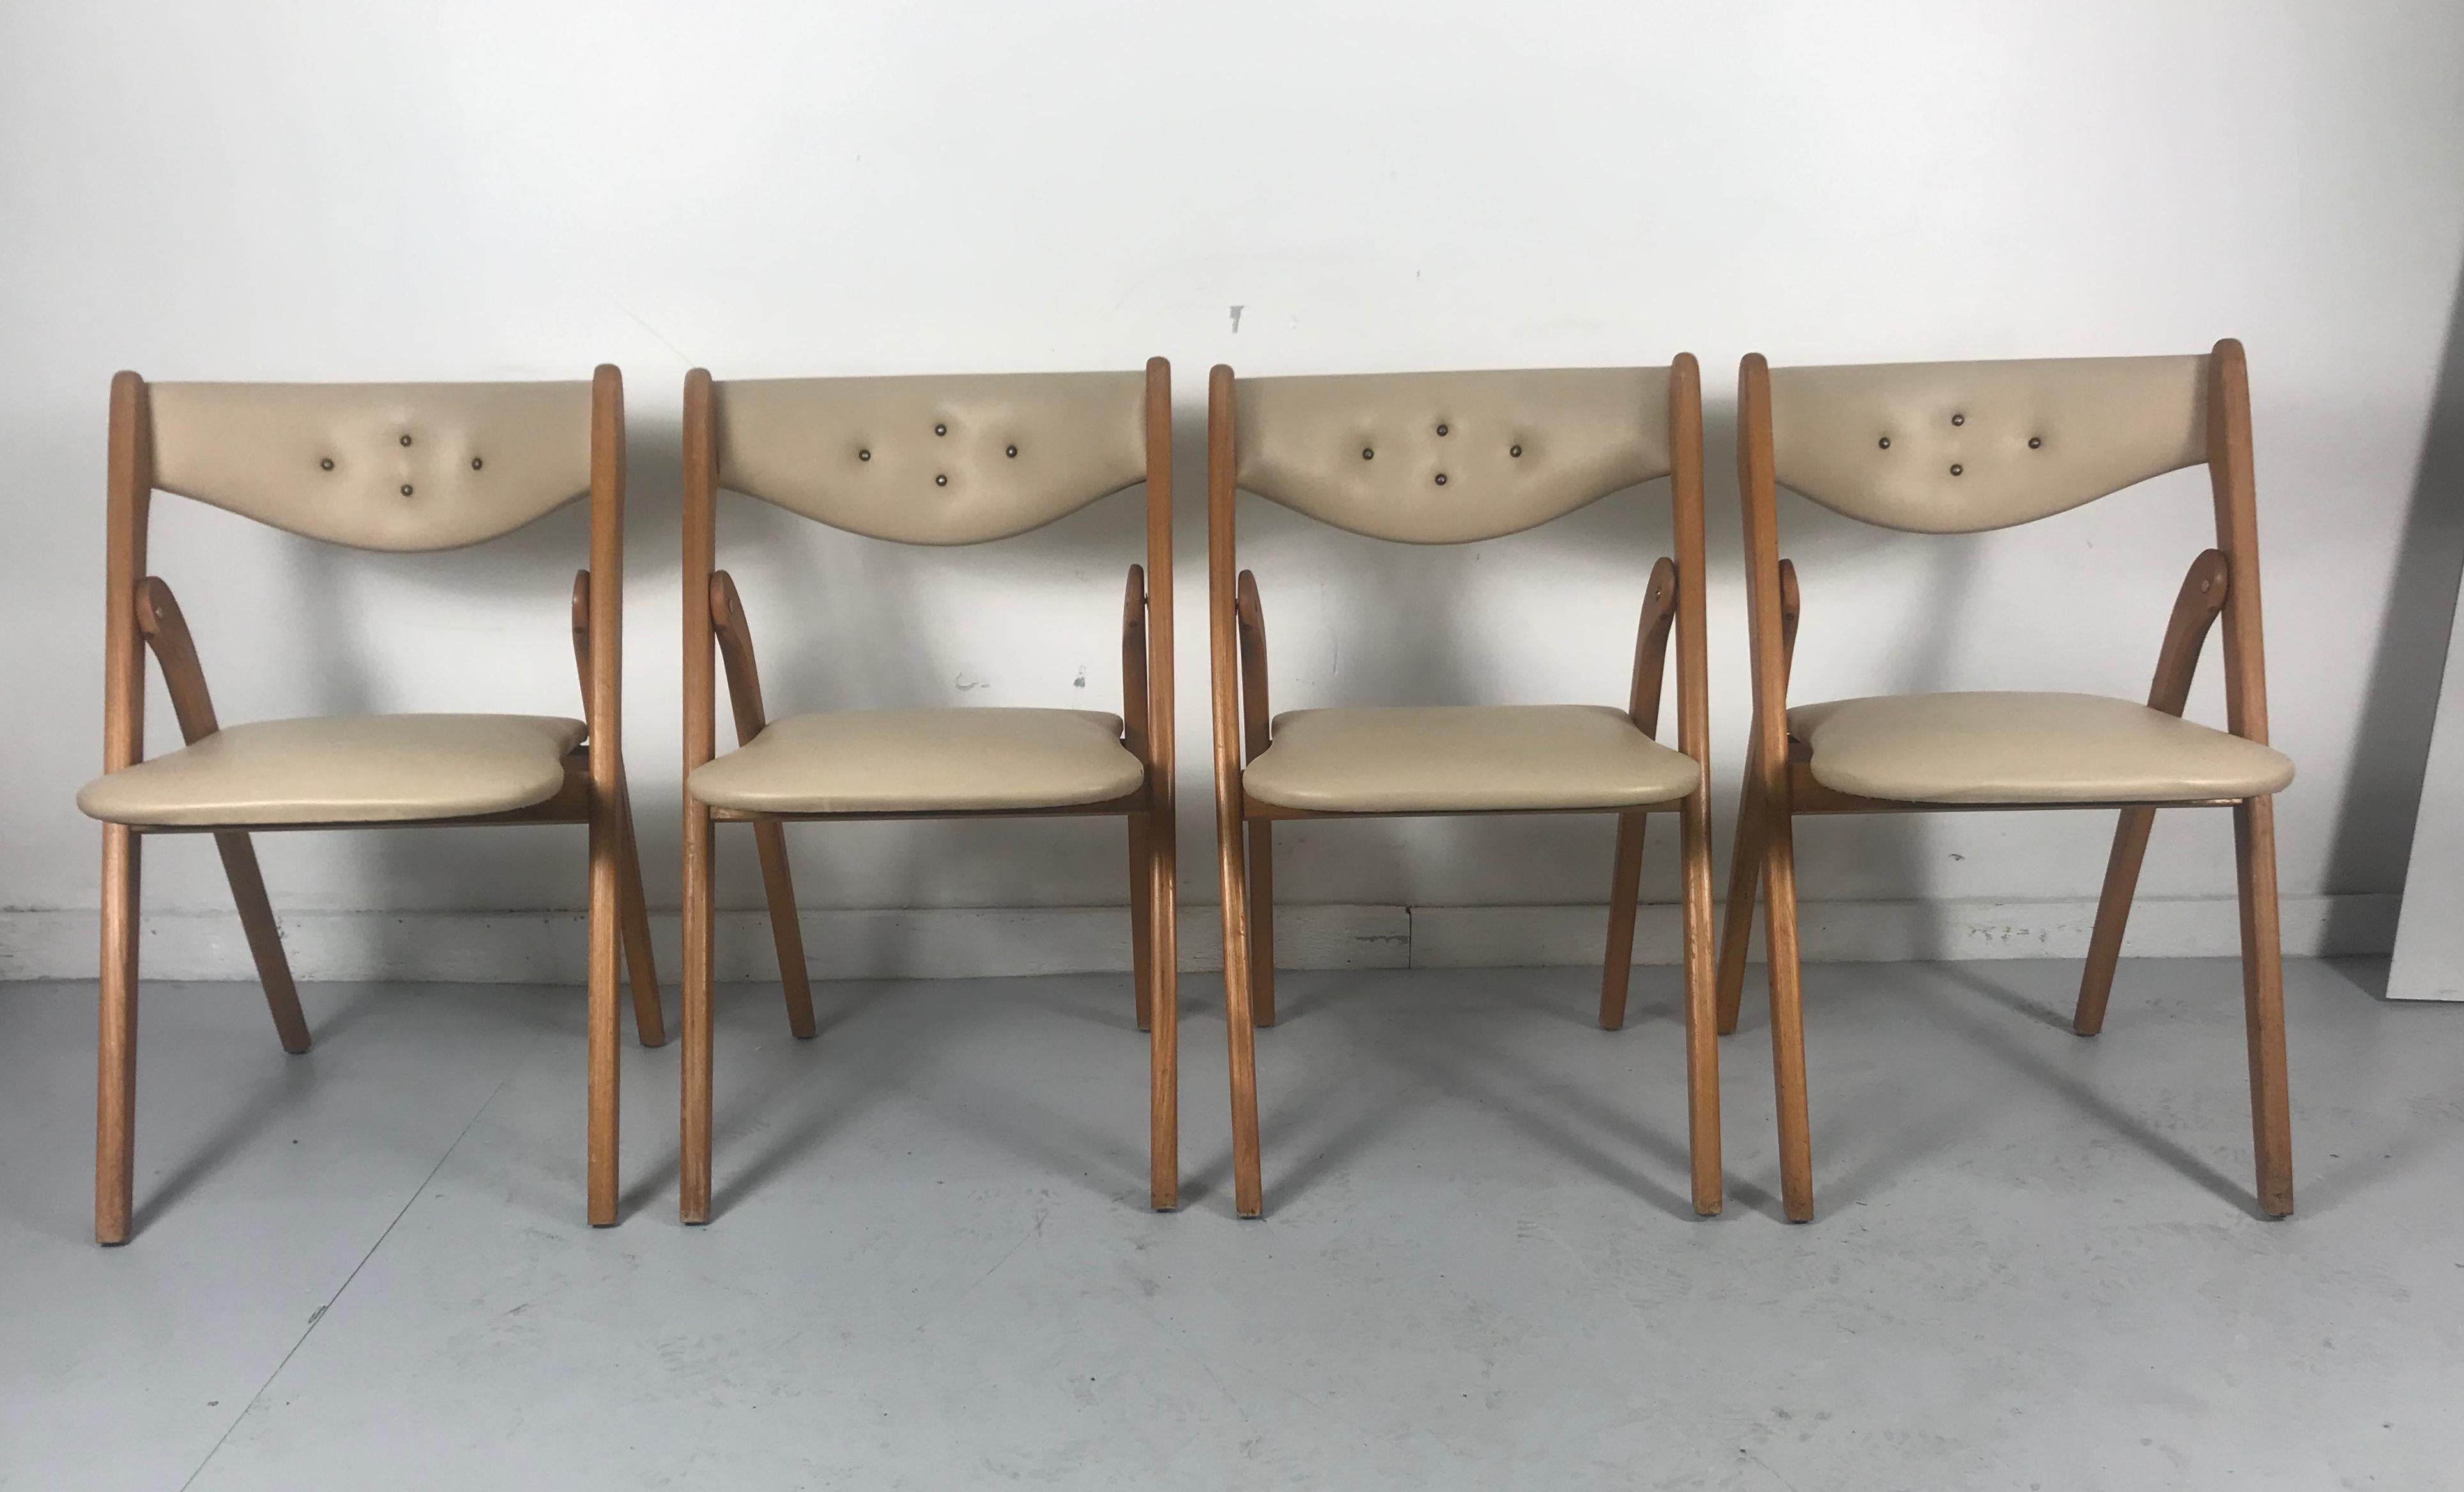 Stunning set 4 Mid-Century Modern folding chairs. (dining) Wonderfold by Coronet.. Amazing quality and design..coined.... You have to be told, they fold.. Retain they're original off white Naugahyde fabric upholstery. Button tufted backs. Nice brass